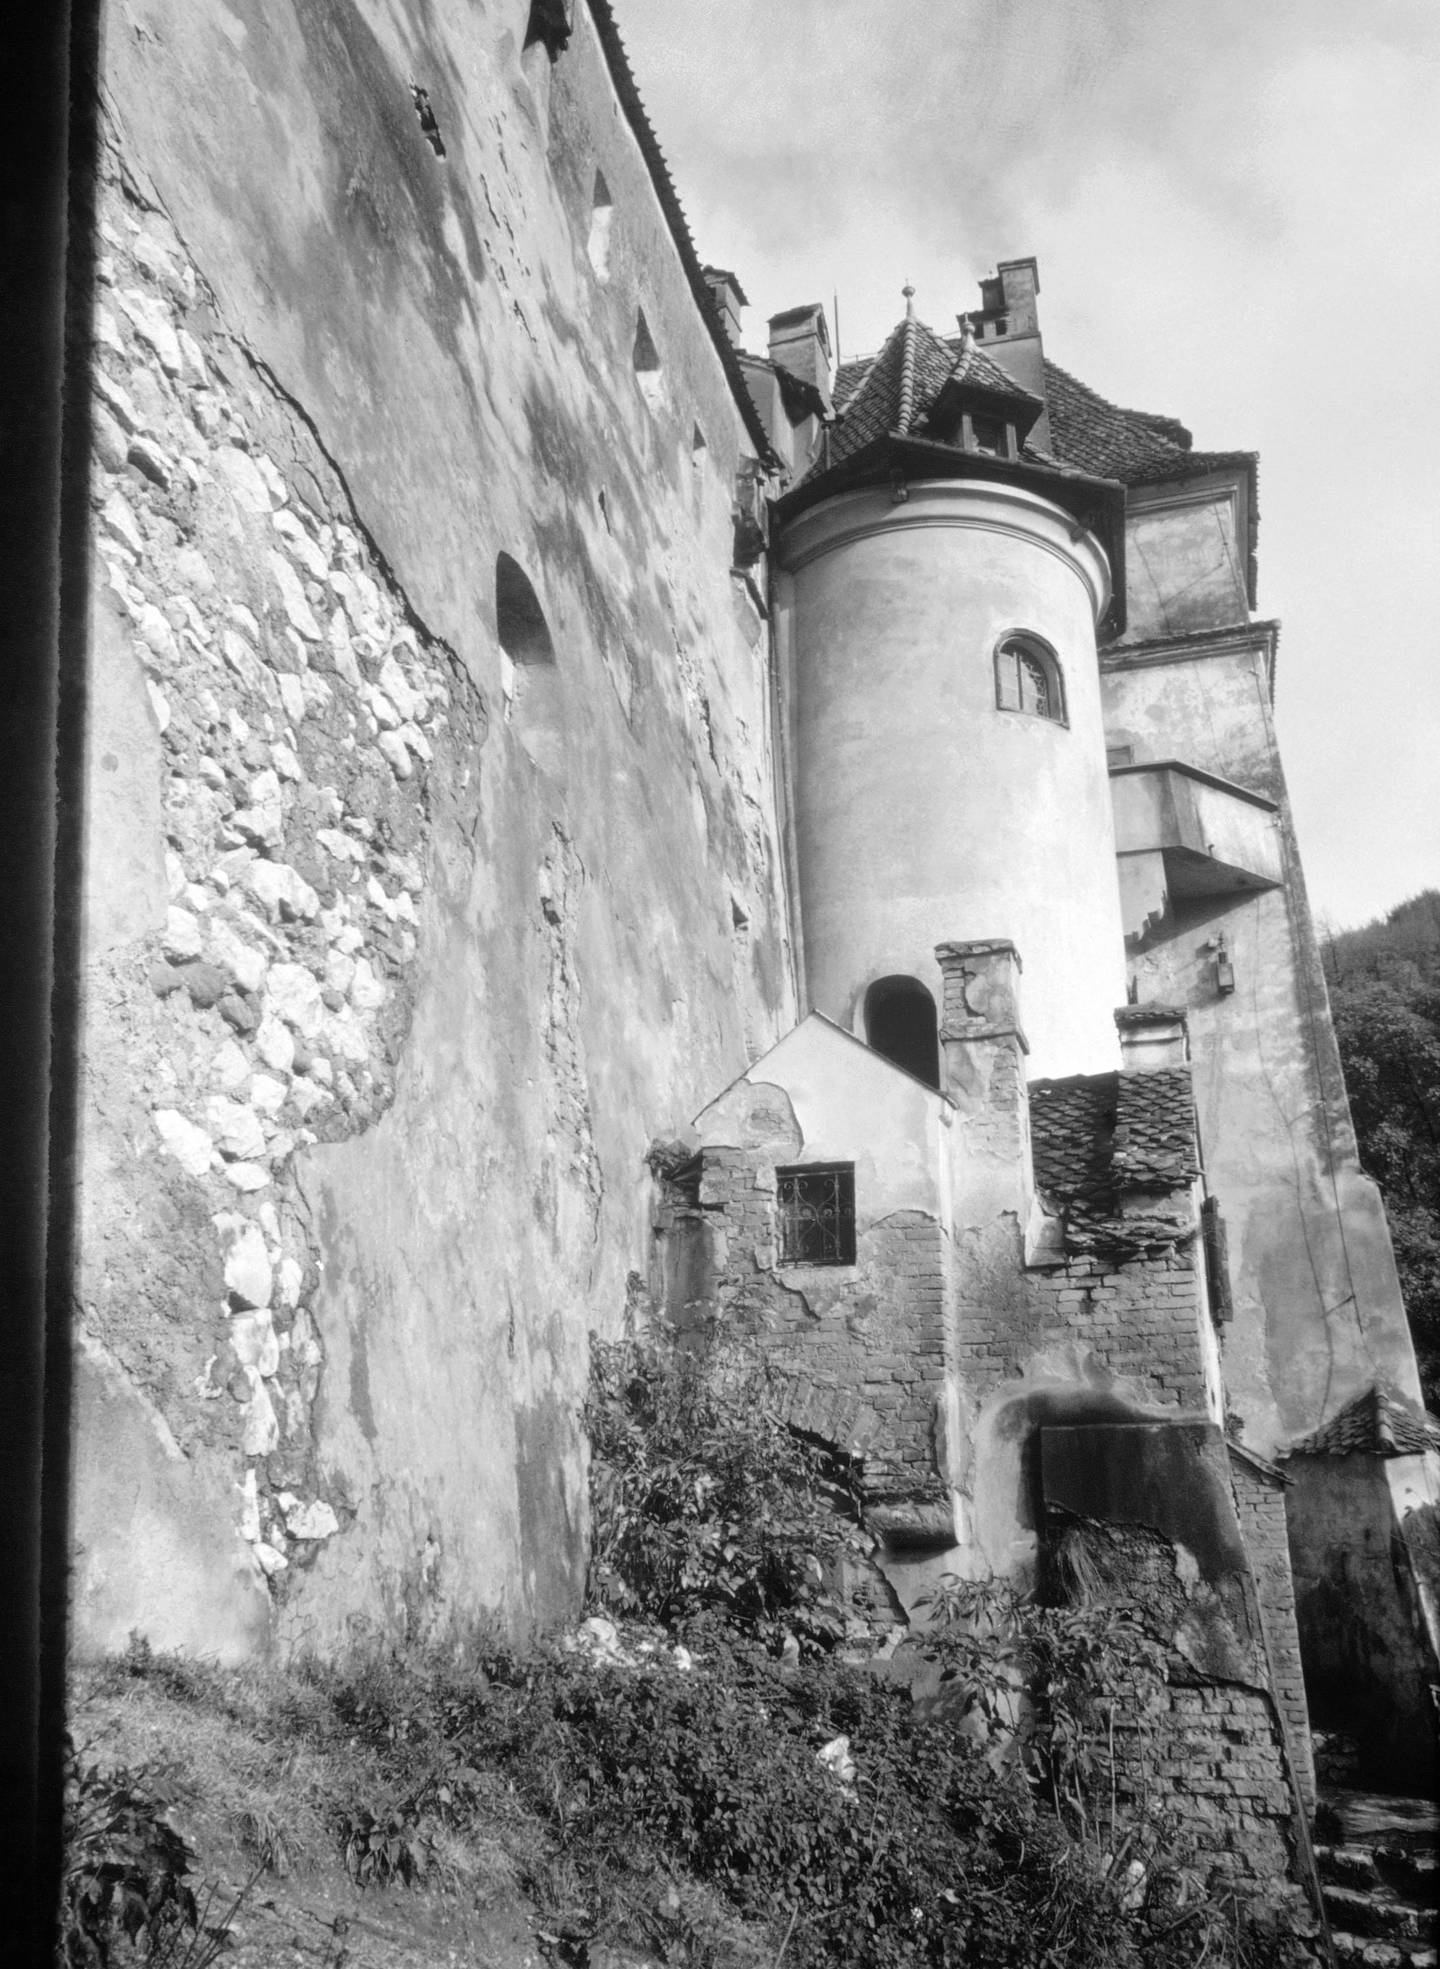  Transylvania, in Romania, Oct. 28, 1987. The various textures and architectural details make it appear to be the perfect setting for Count Dracula, so tourists have adopted the castle as Dracula's own. (AP Photo/Richard Clement)